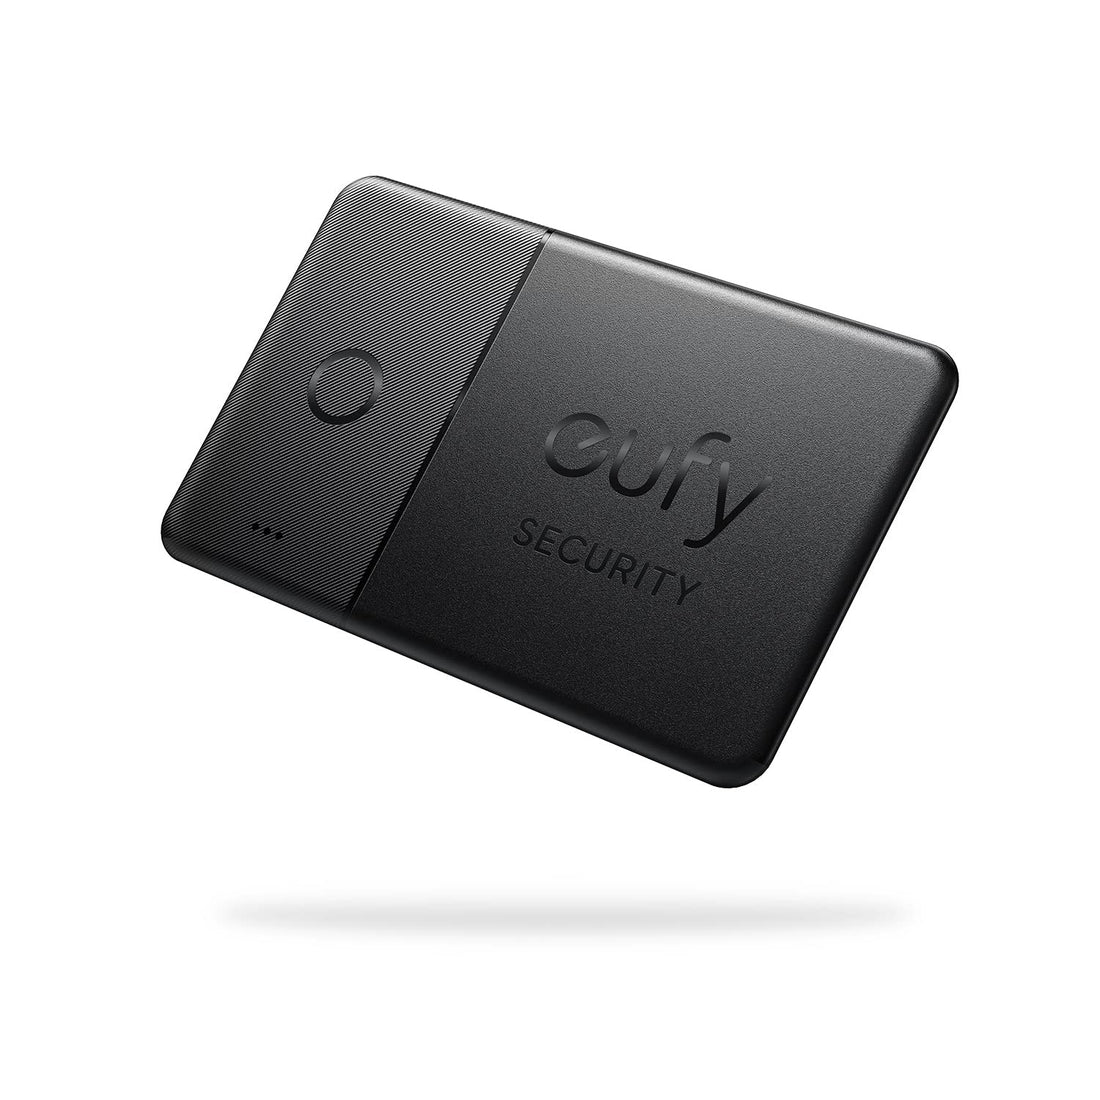 eufy Security SmartTrack Card (Black, 1-Pack), Works with Apple Find My (iOS Only), Wallet Tracker, Phone Finder, Water Resistant, Up to 3-Year Battery Life, 2.4mm Thickness (Android Not Supported)